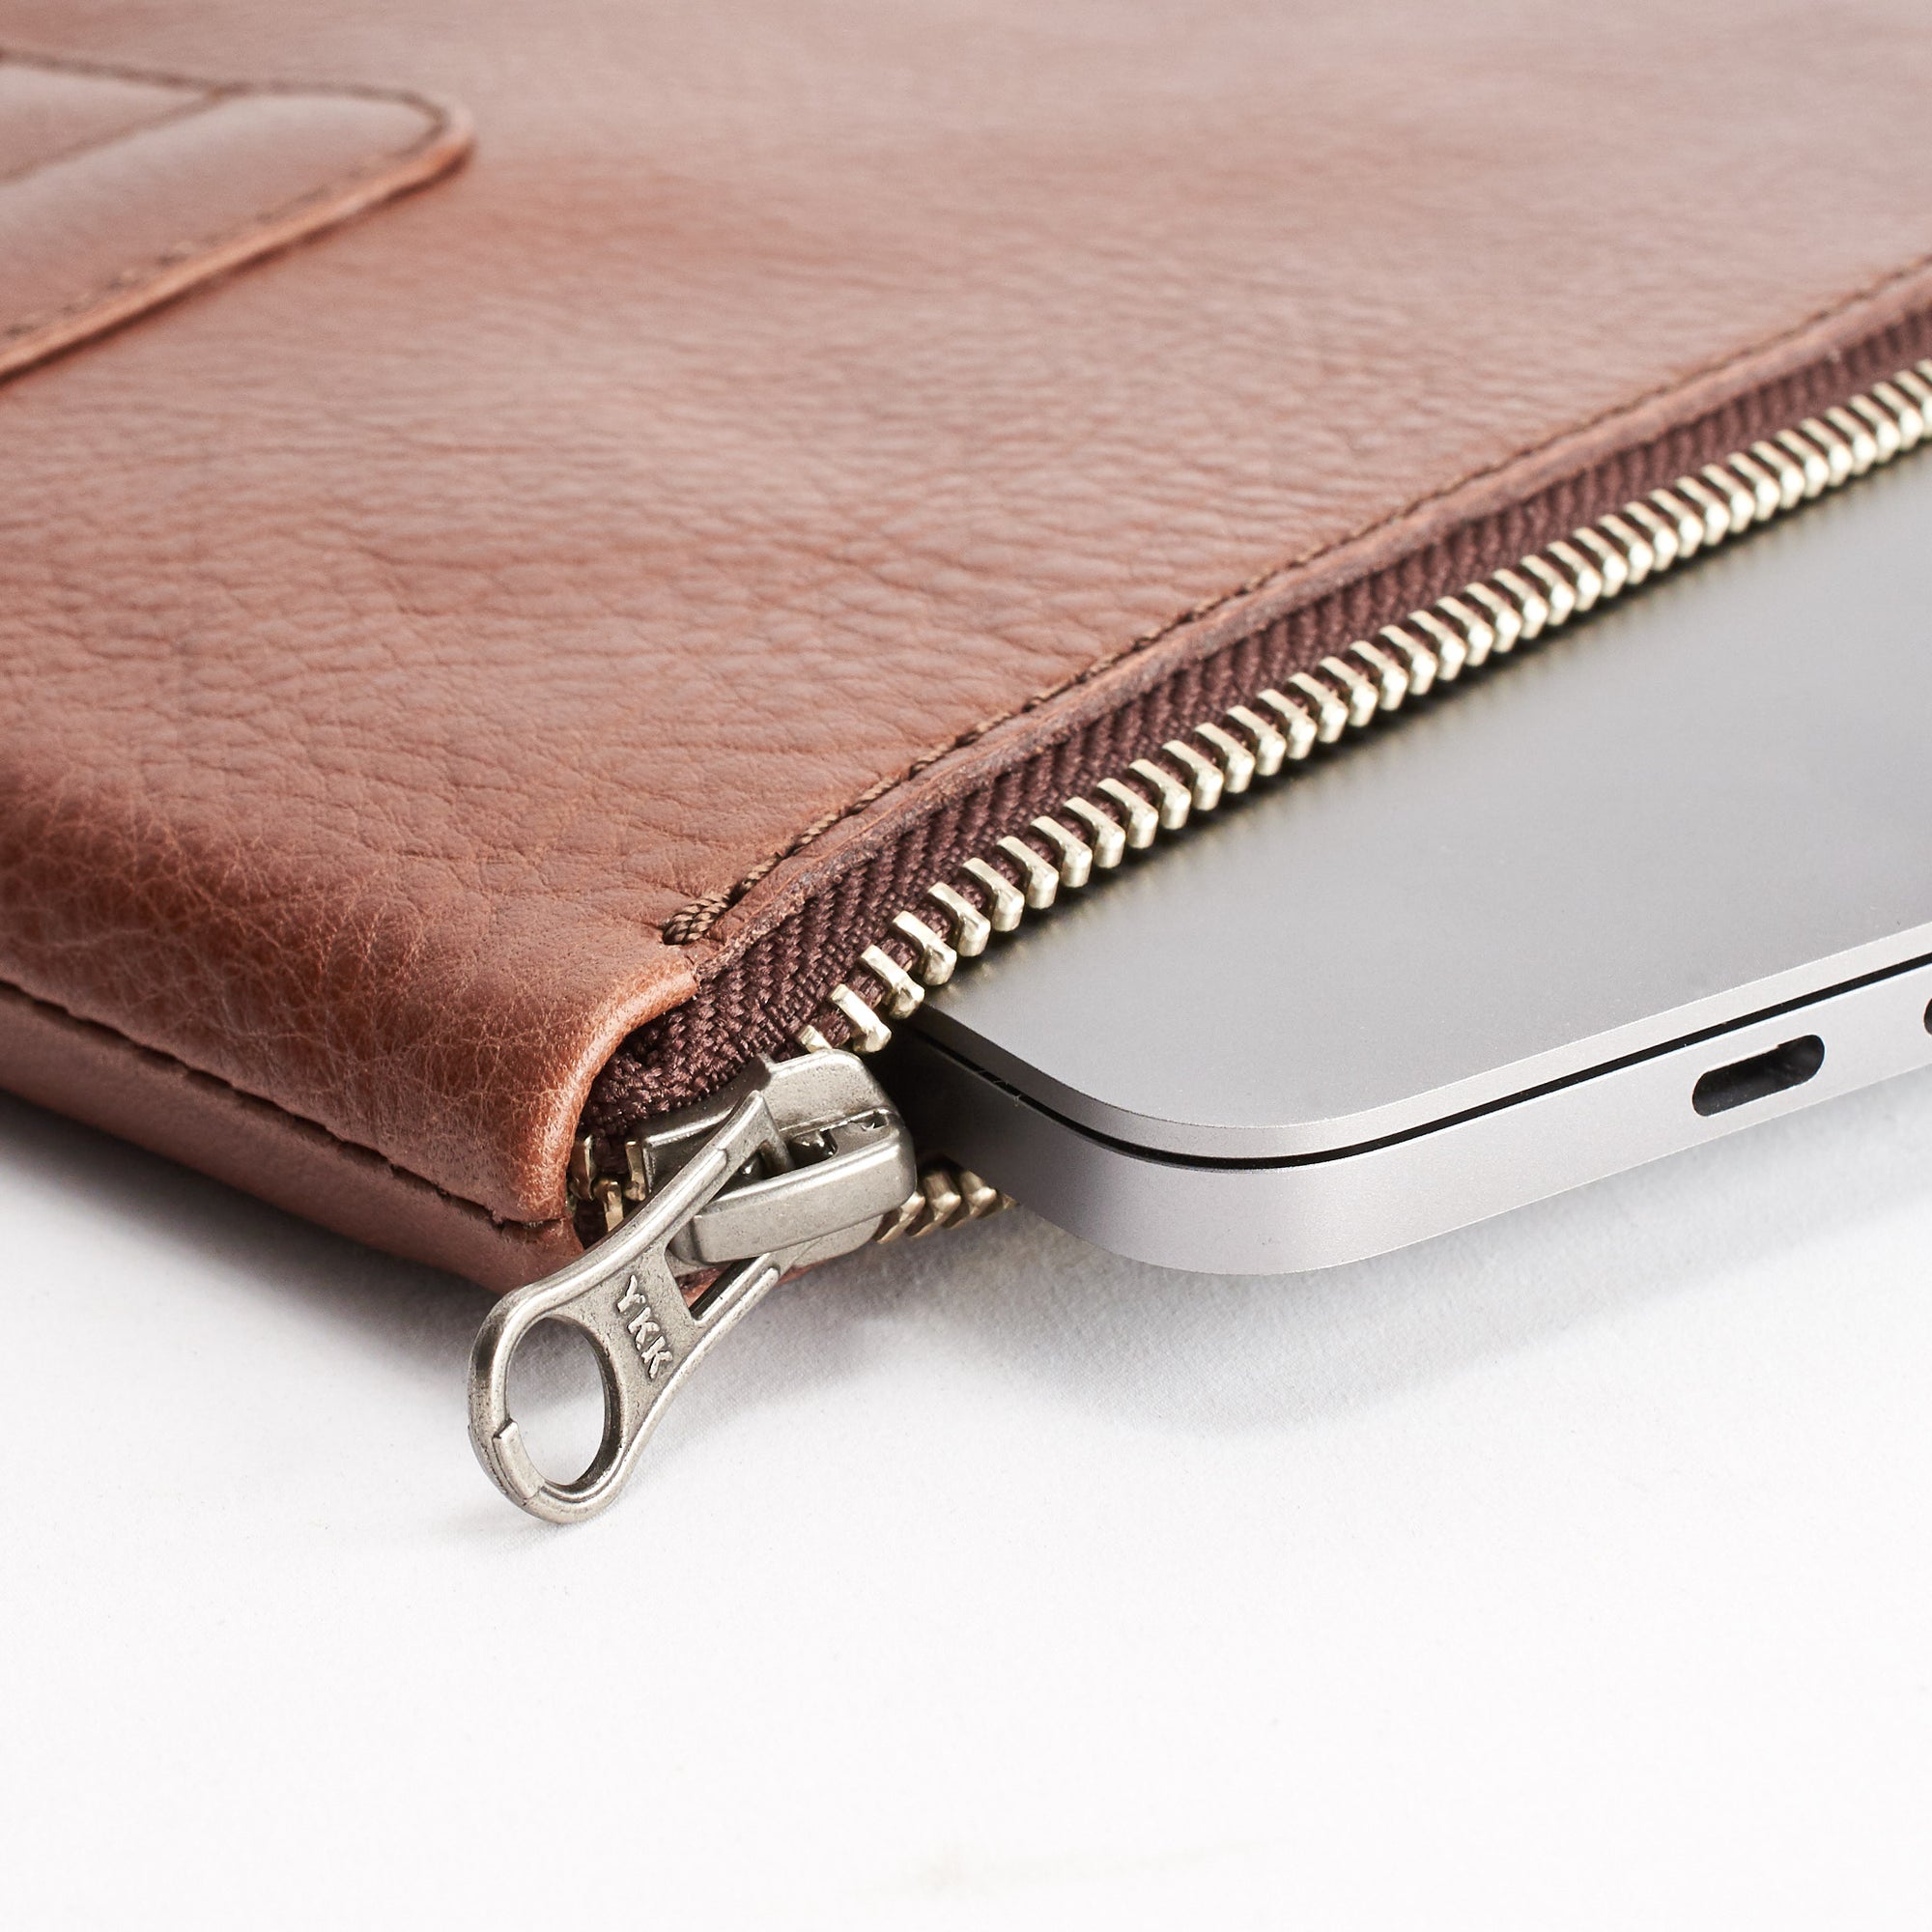 YKK metallic zippers. Handcrafted leather brown  laptop and documents portfolio case. 